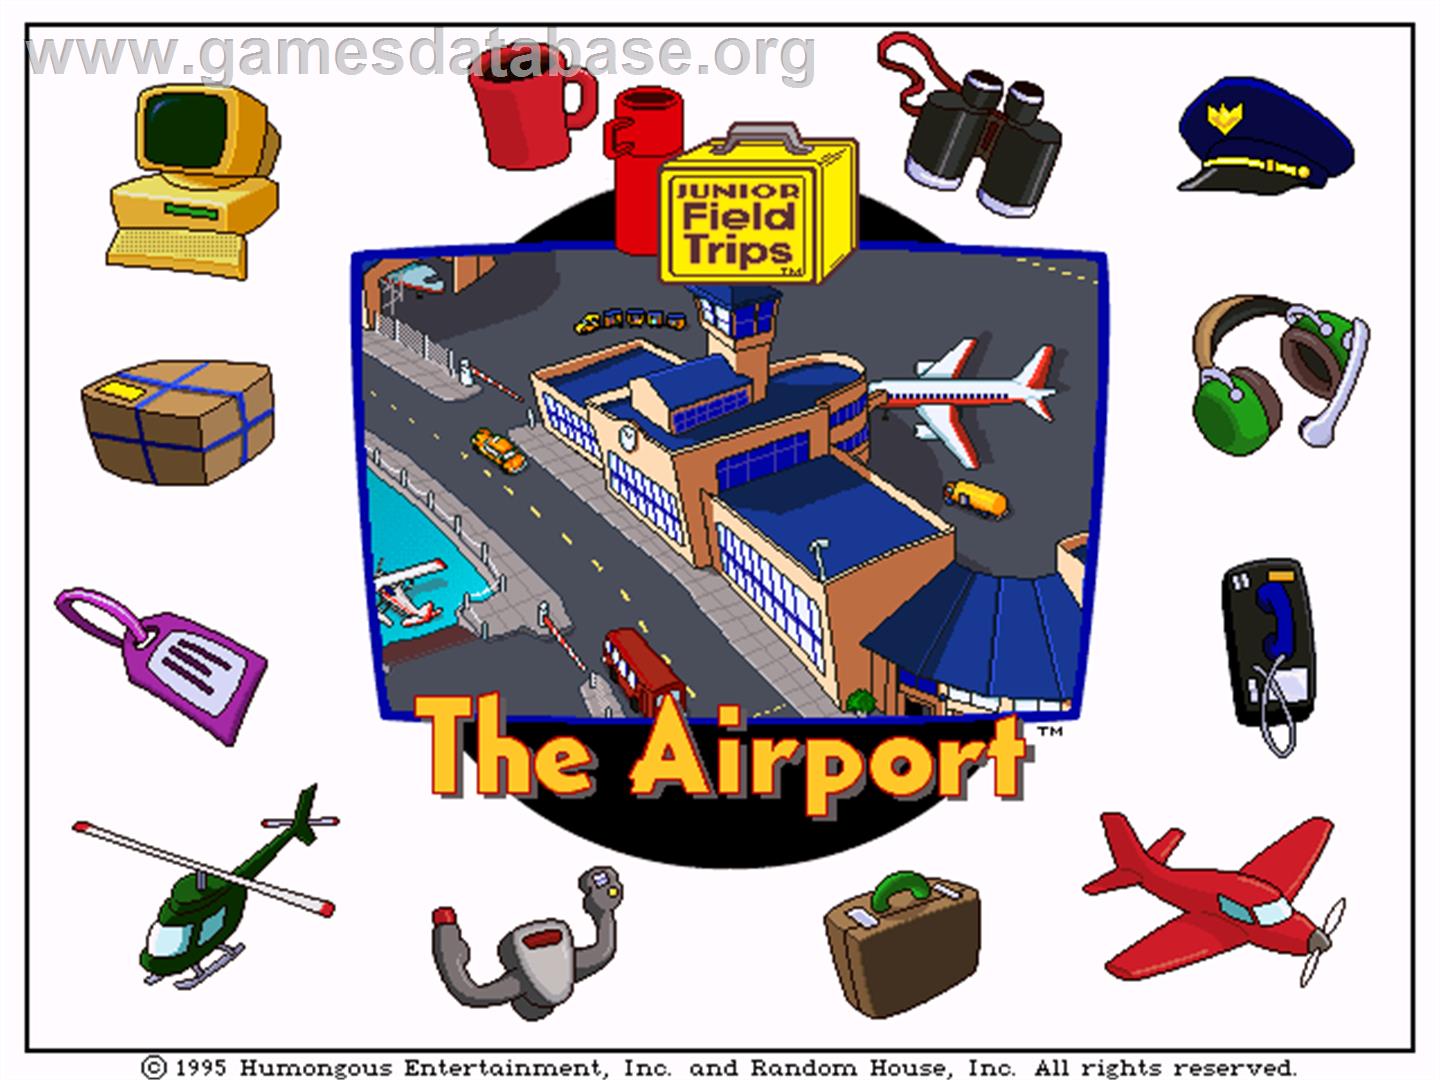 Let's Explore the Airport with Buzzy - ScummVM - Artwork - Title Screen